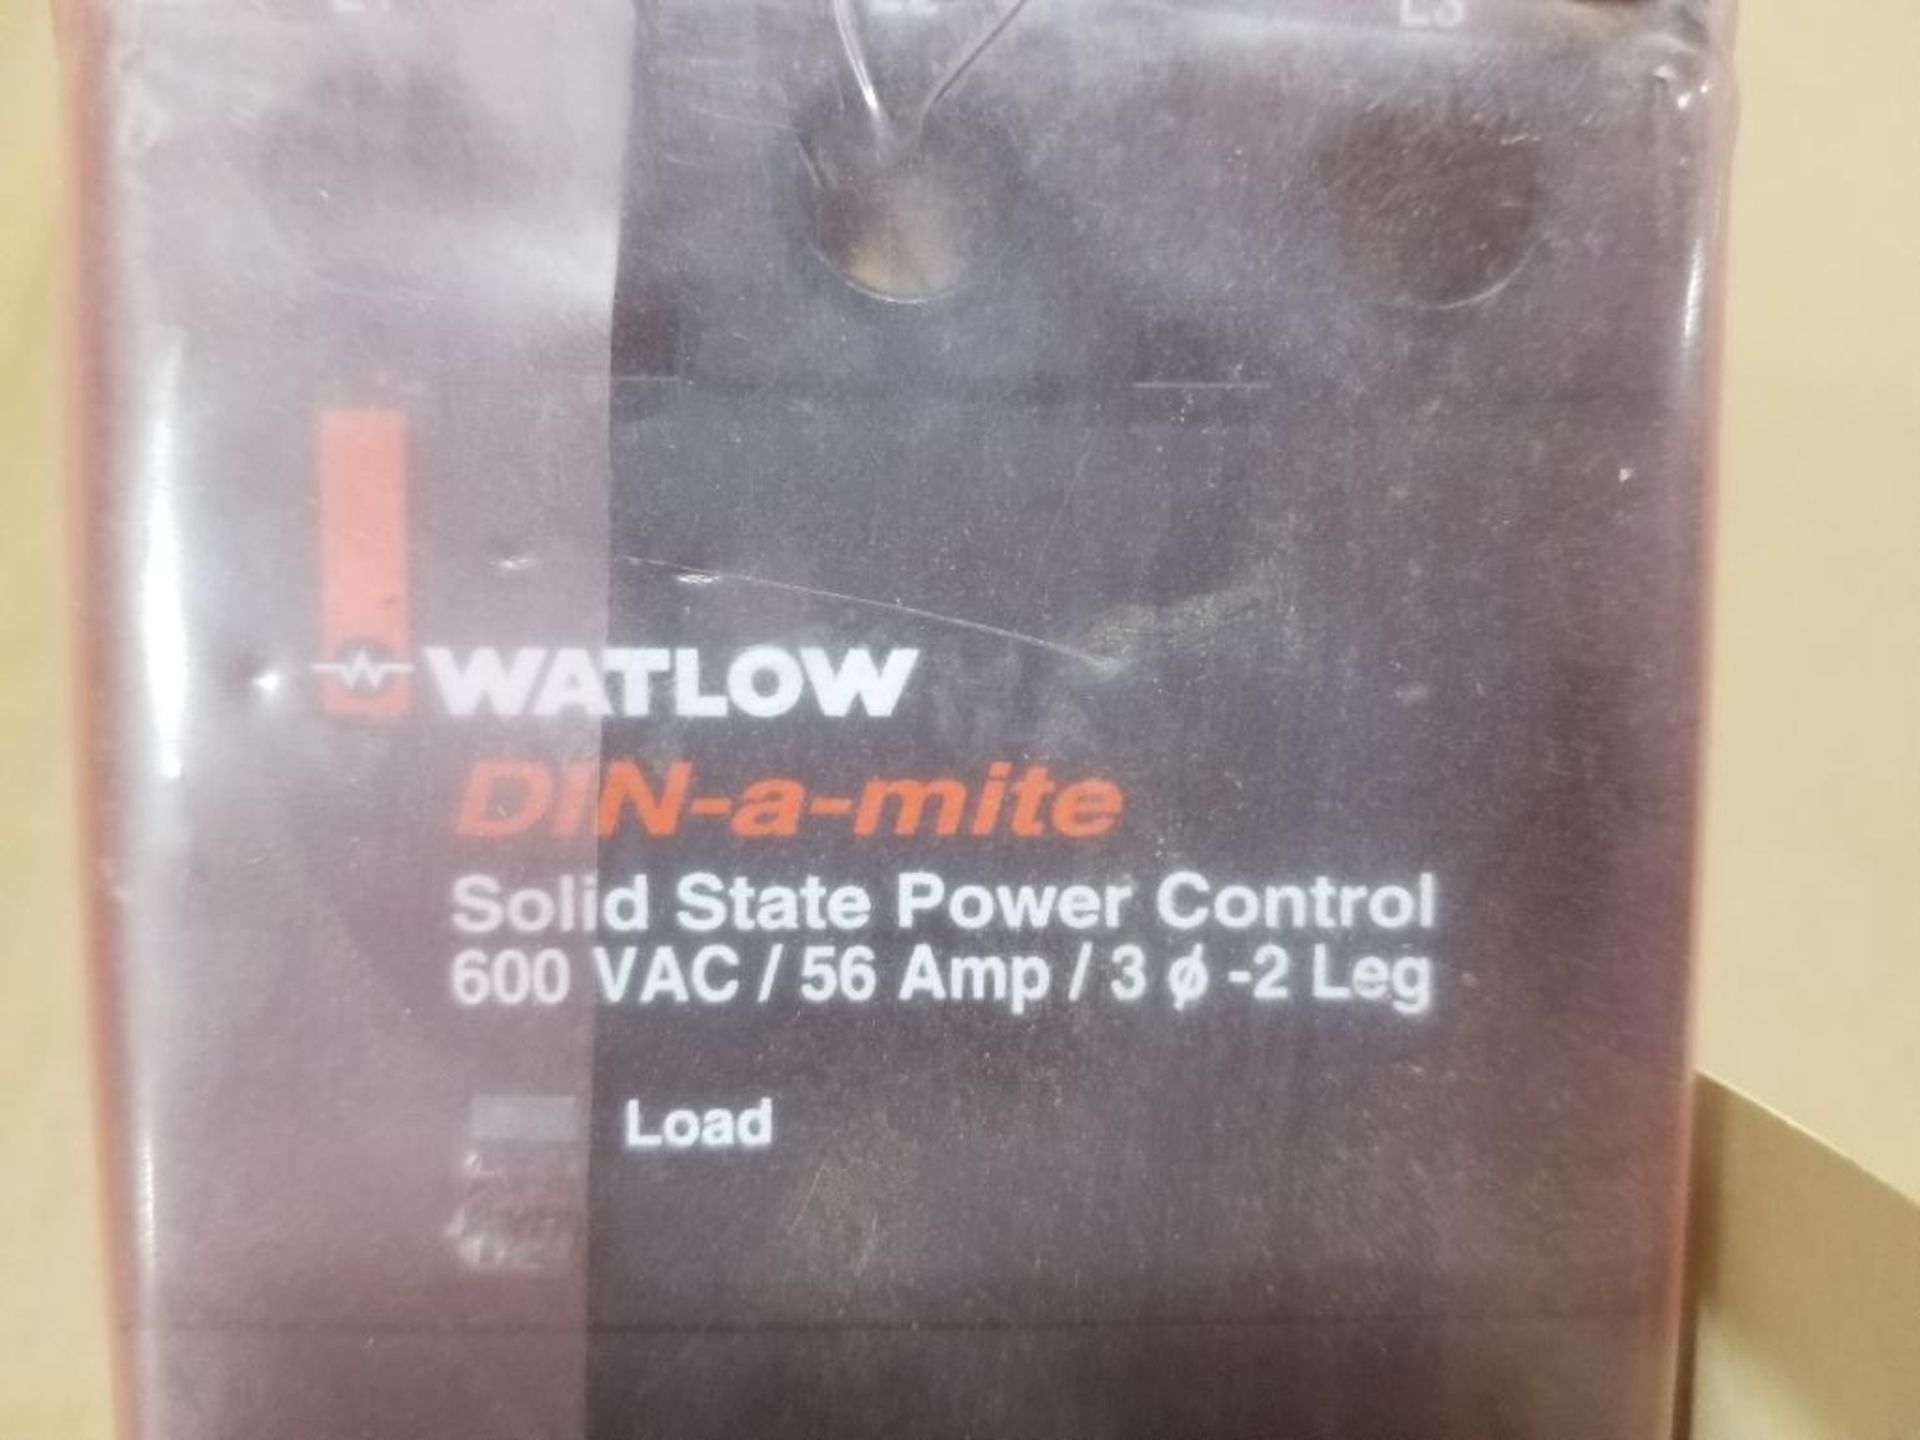 Watlow DIN-a-mite solid state power control. 600VAC. - Image 2 of 6